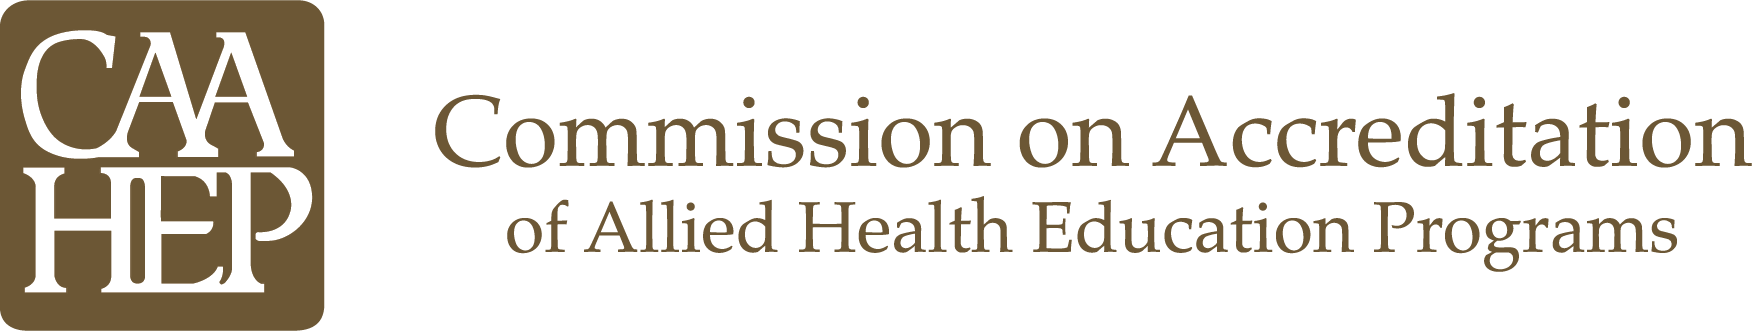 Commission on Accreditation of Allied Health Education Programs (CAAHEP) Logo